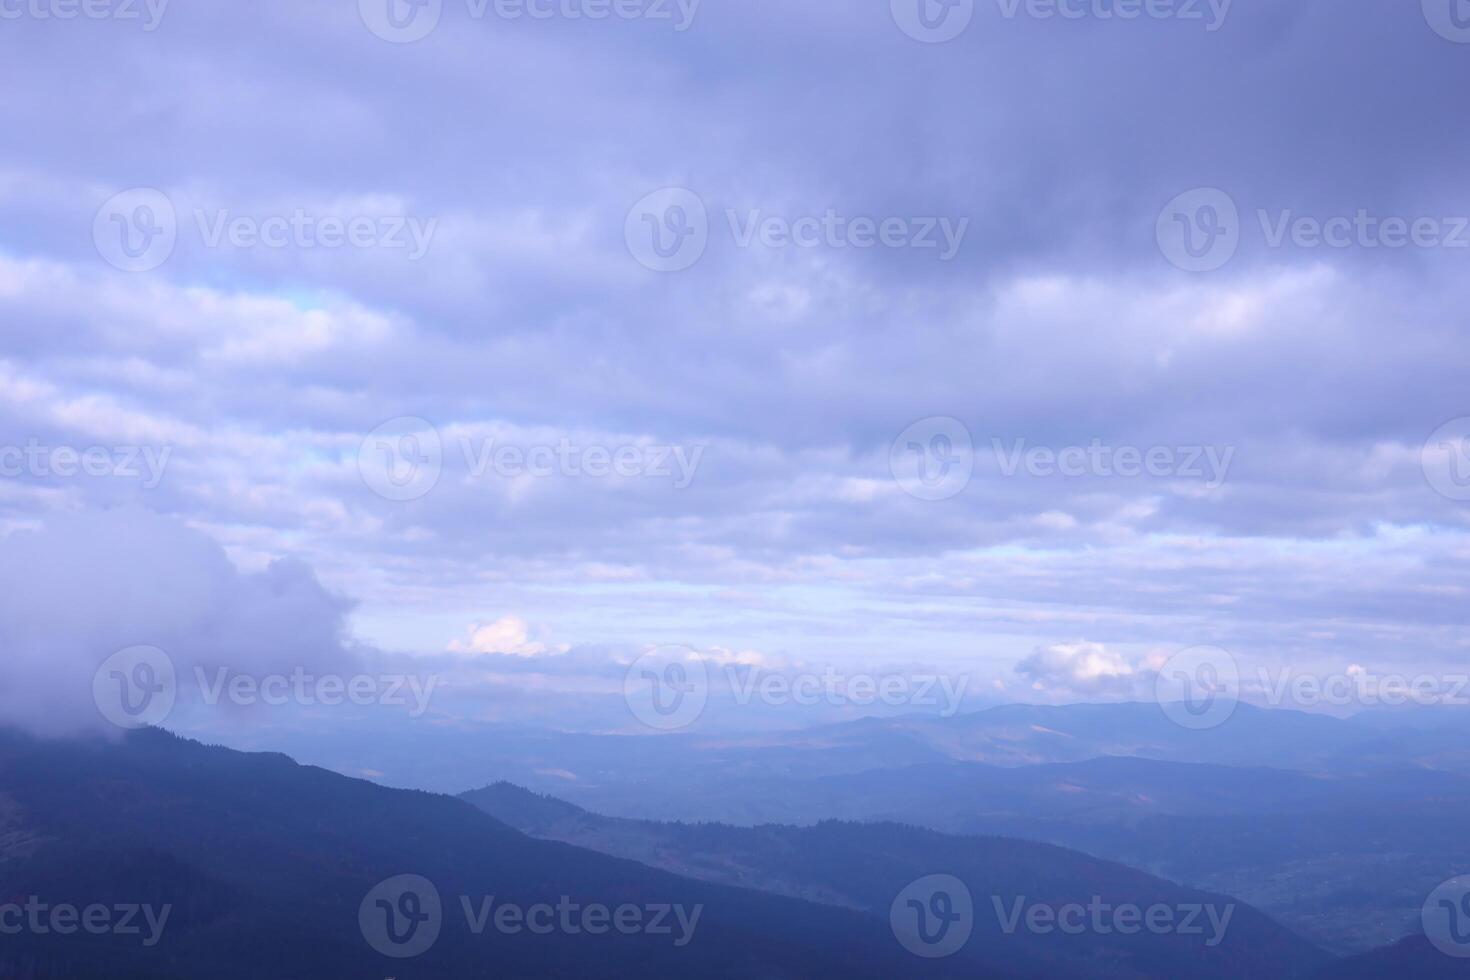 Morning view from the Dragobrat mountain peaks in Carpathian mountains, Ukraine. Cloudy and foggy landscape around Drahobrat Peaks photo